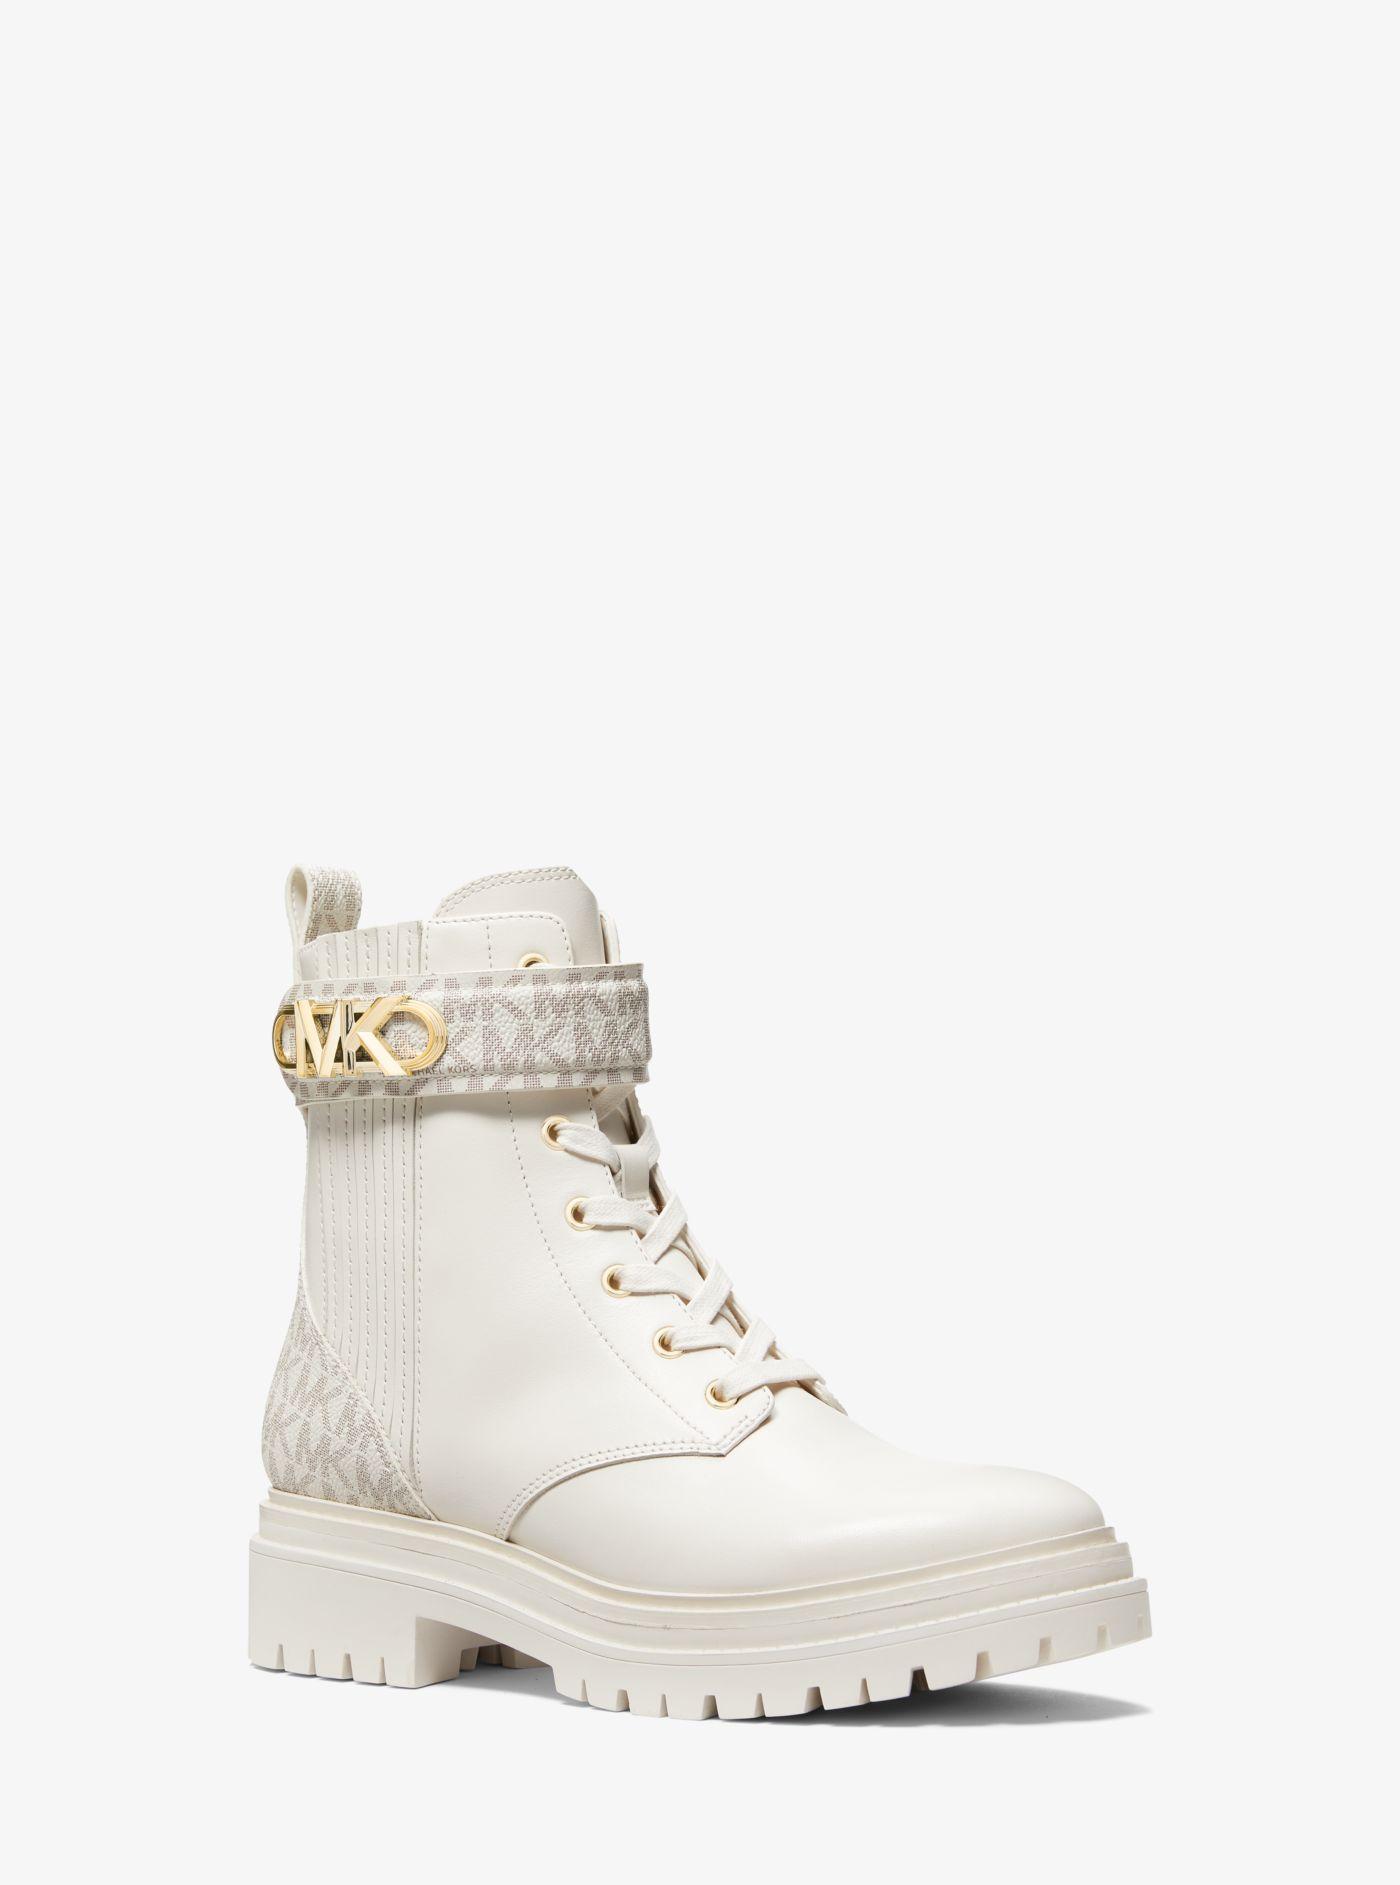 Michael Kors Parker Leather Combat Boot in White | Lyst